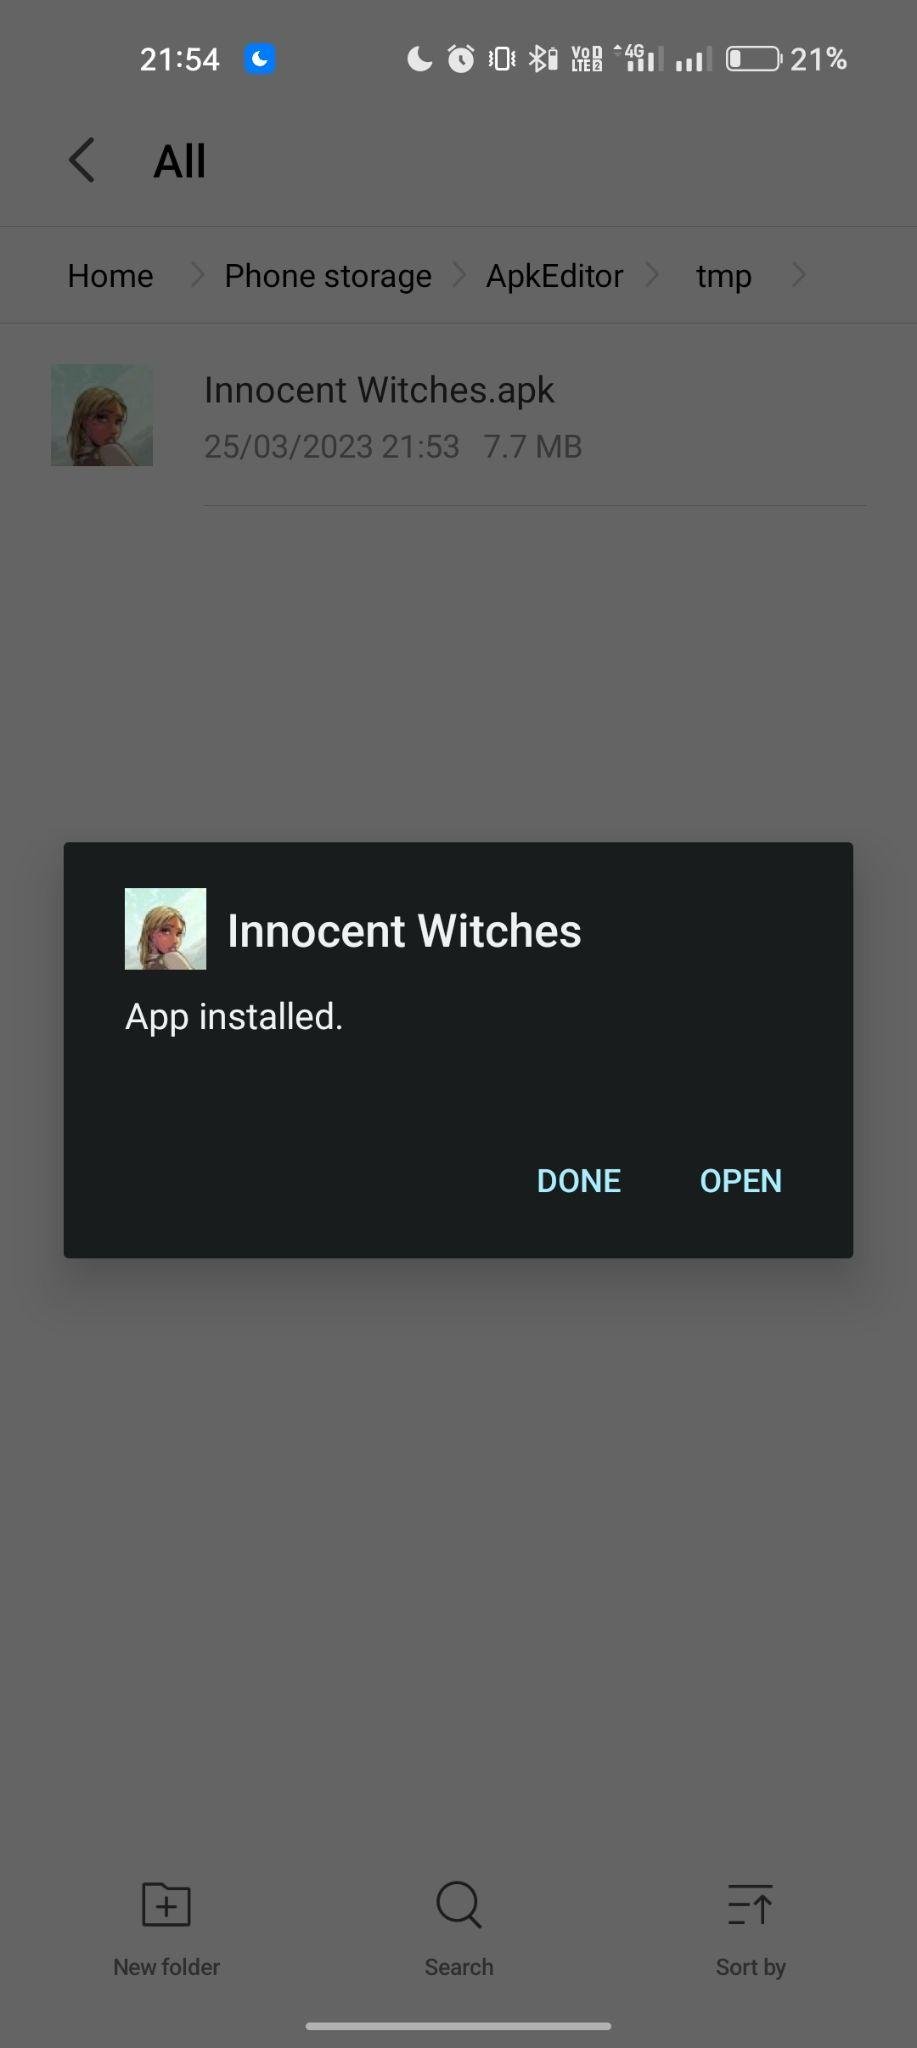 Innocent Witches apk installed